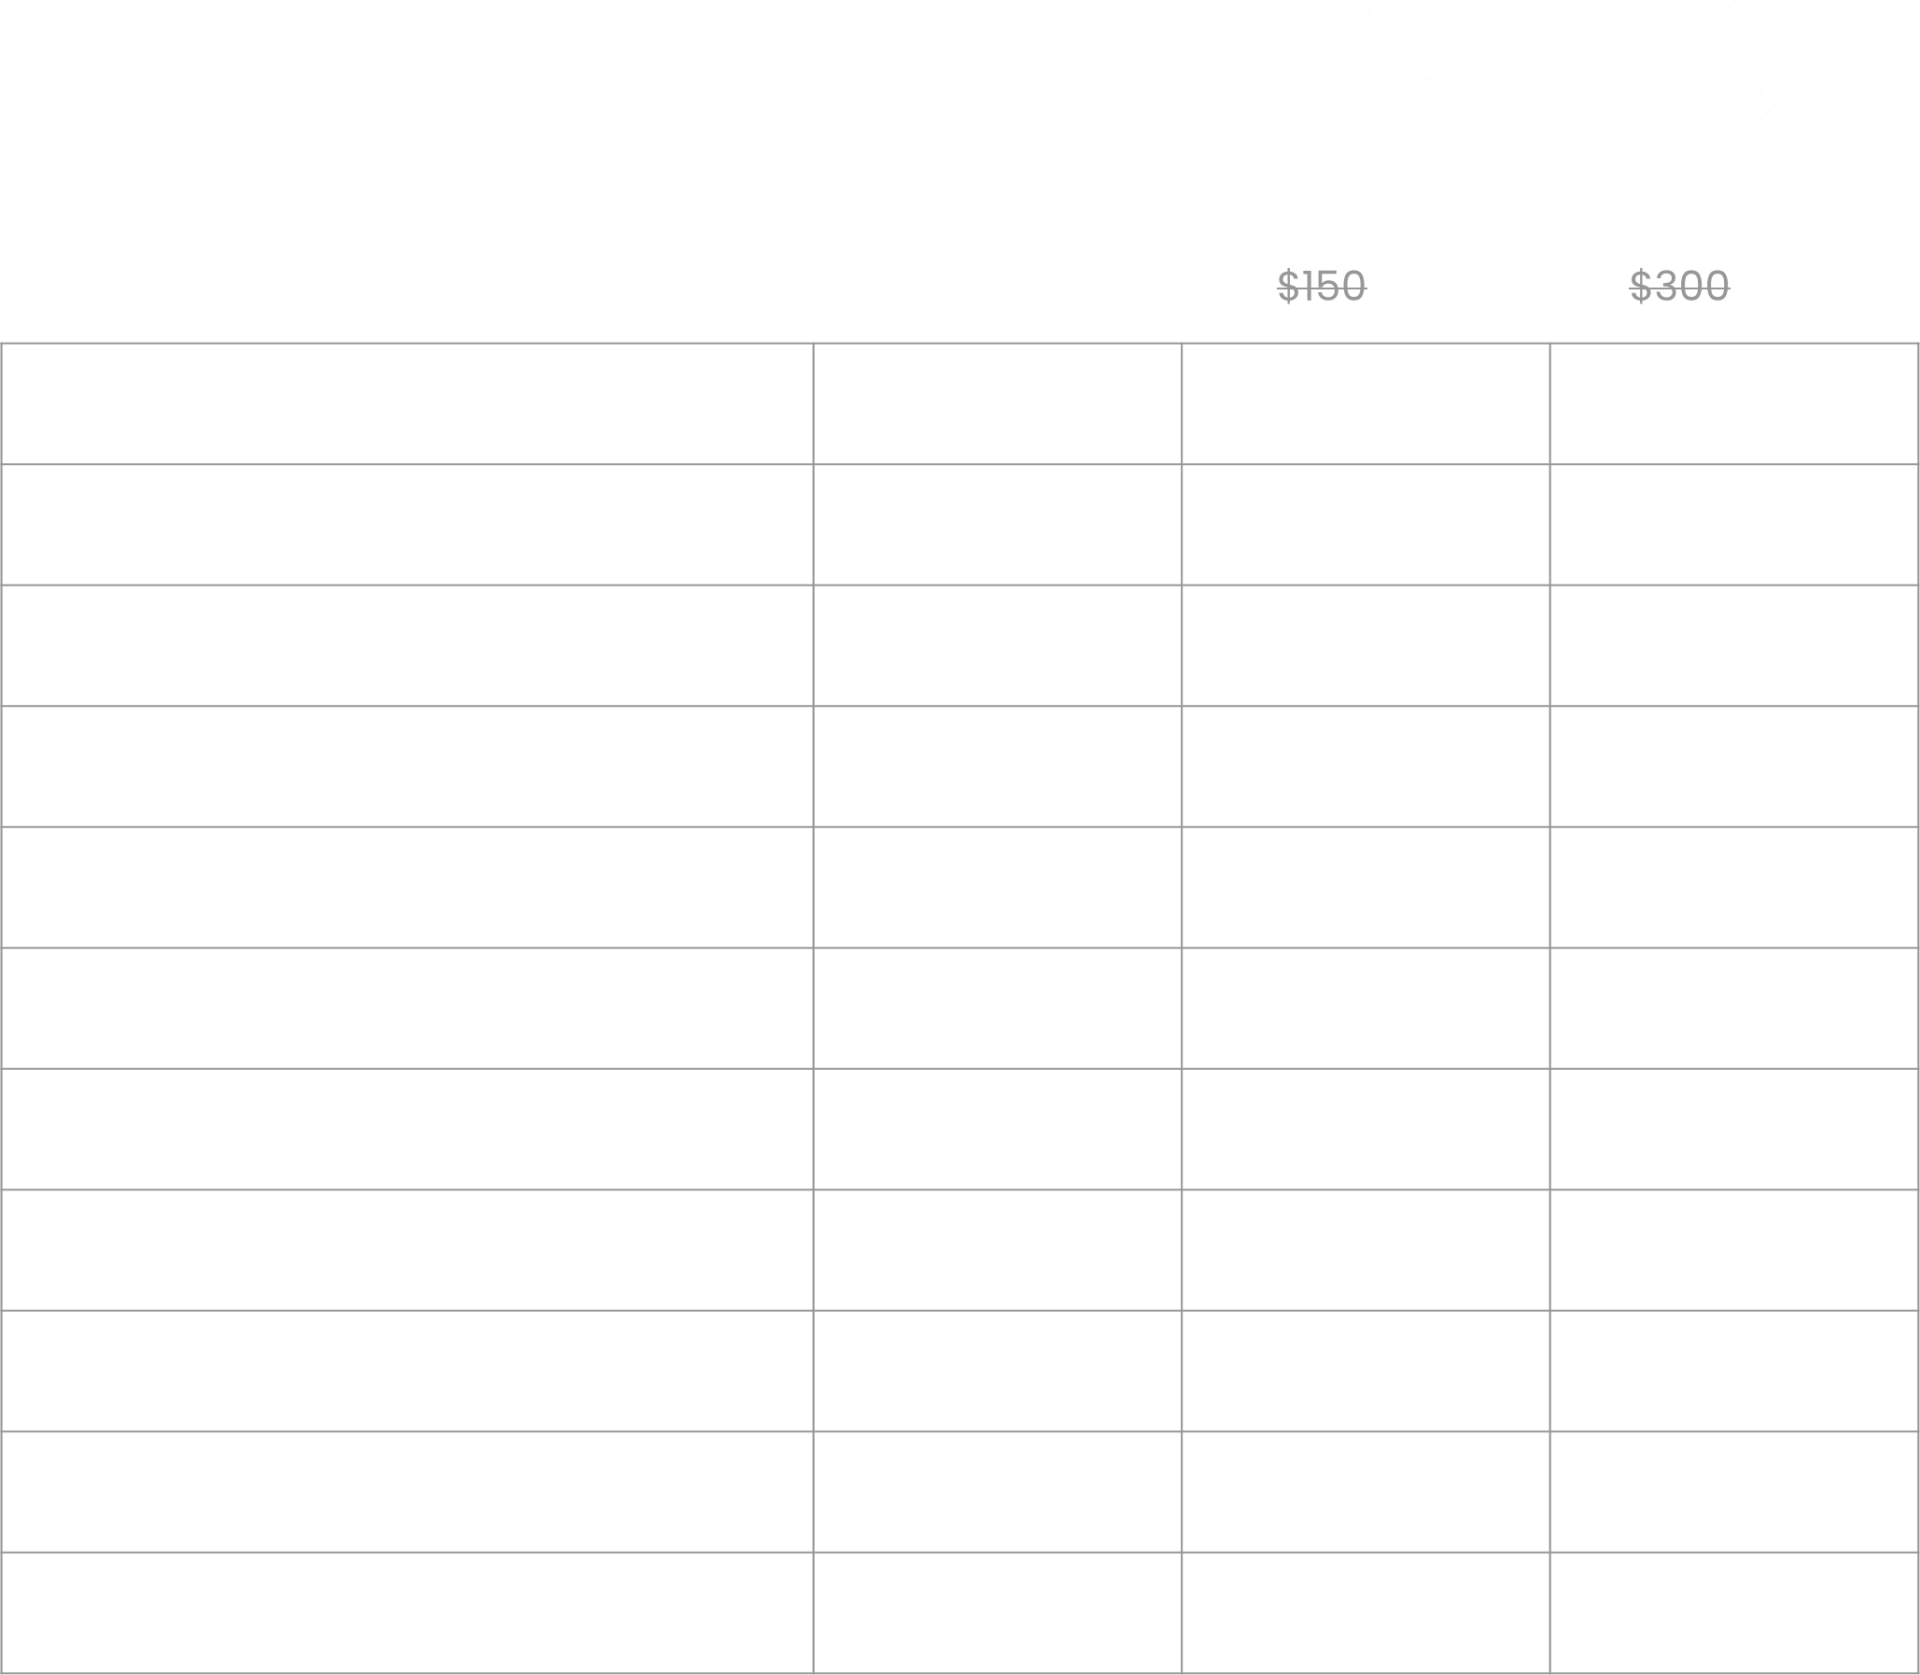 A table breaking down the included features for each level of summit access. Reader friendly version at button below.